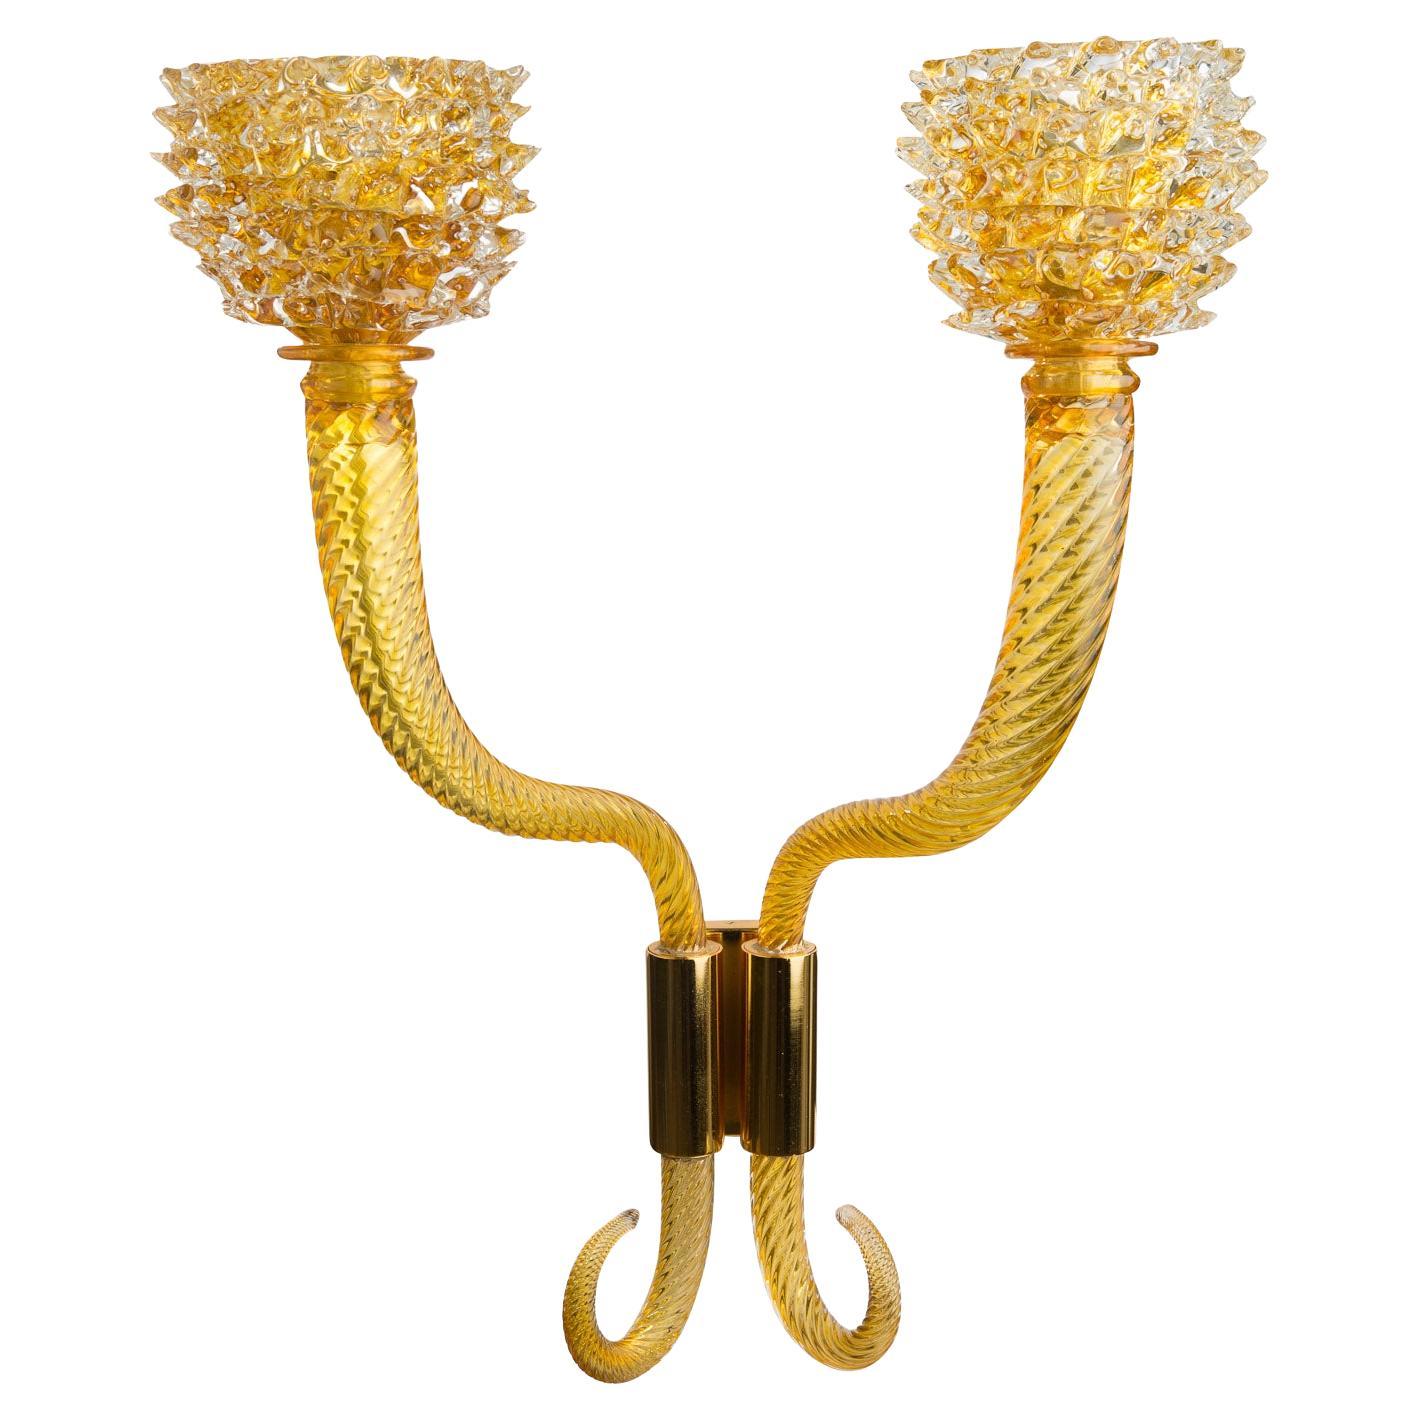 Extra large Murano Glass Palazzo wall sconces in Amber and Cristallo 